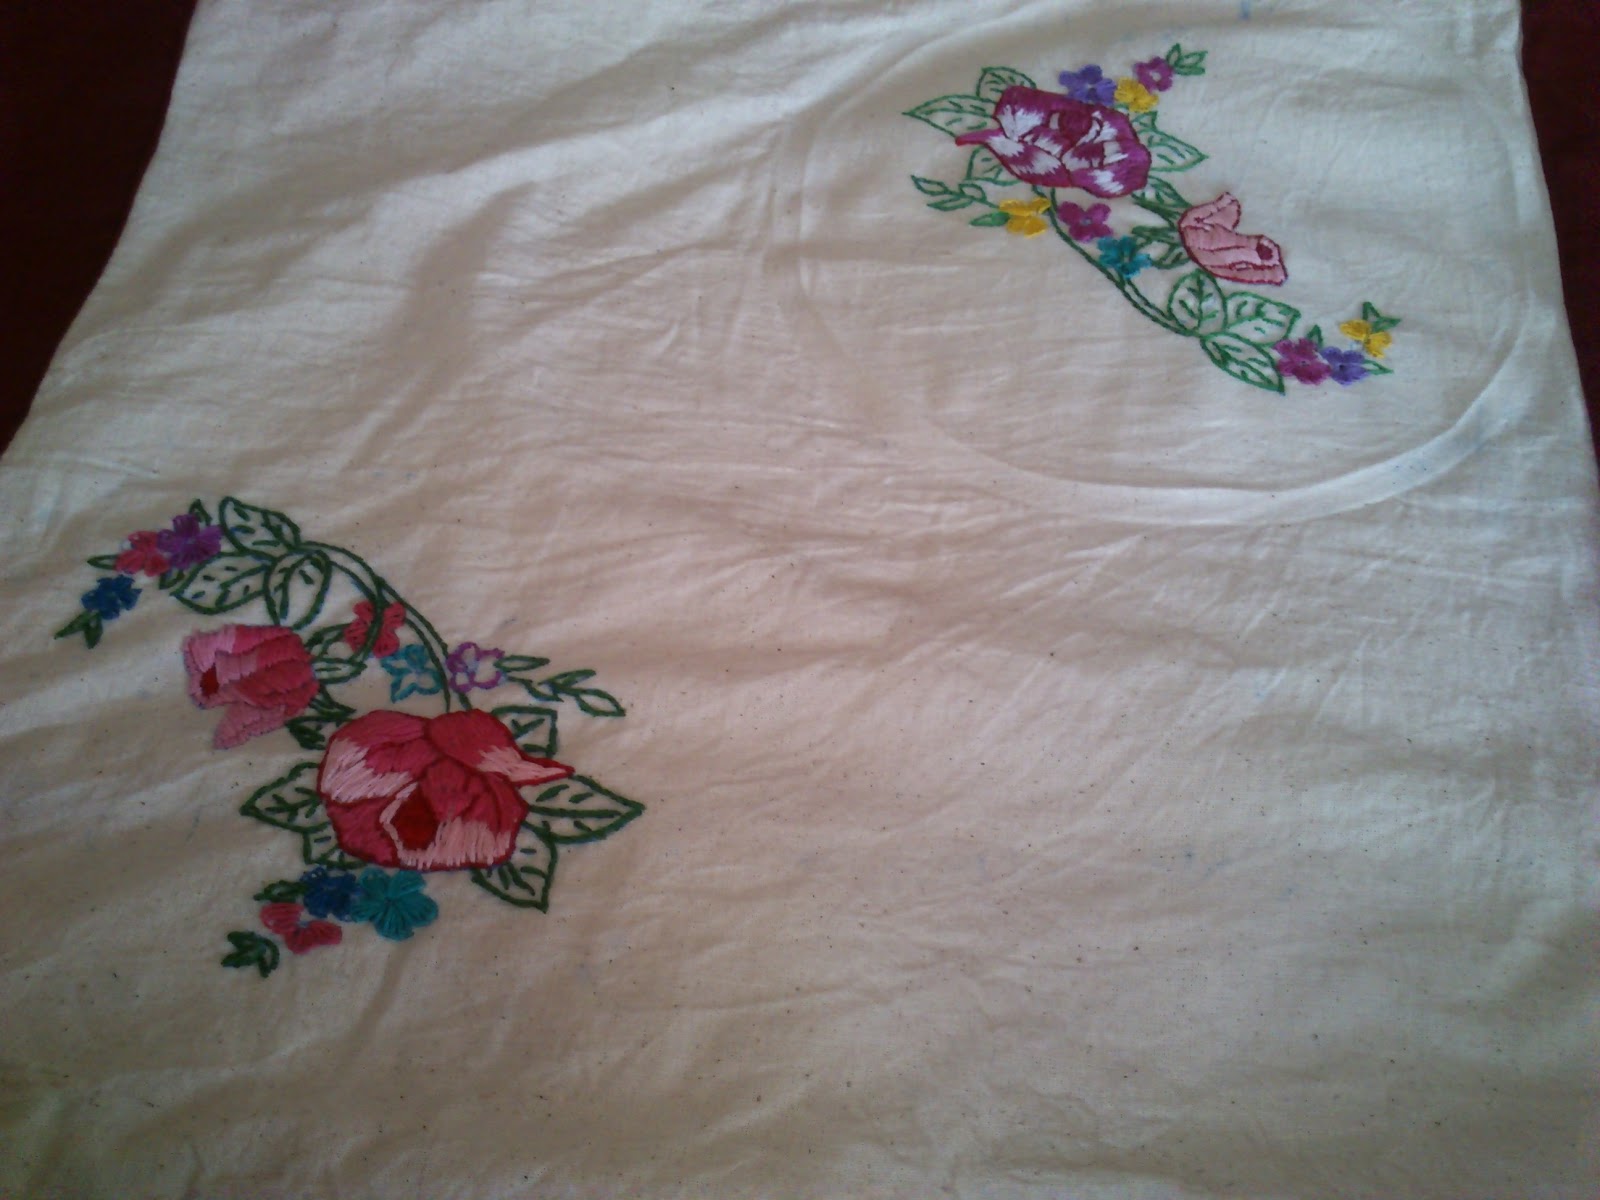 Anithaasleisuretimes: Embroidery Pillow Cover